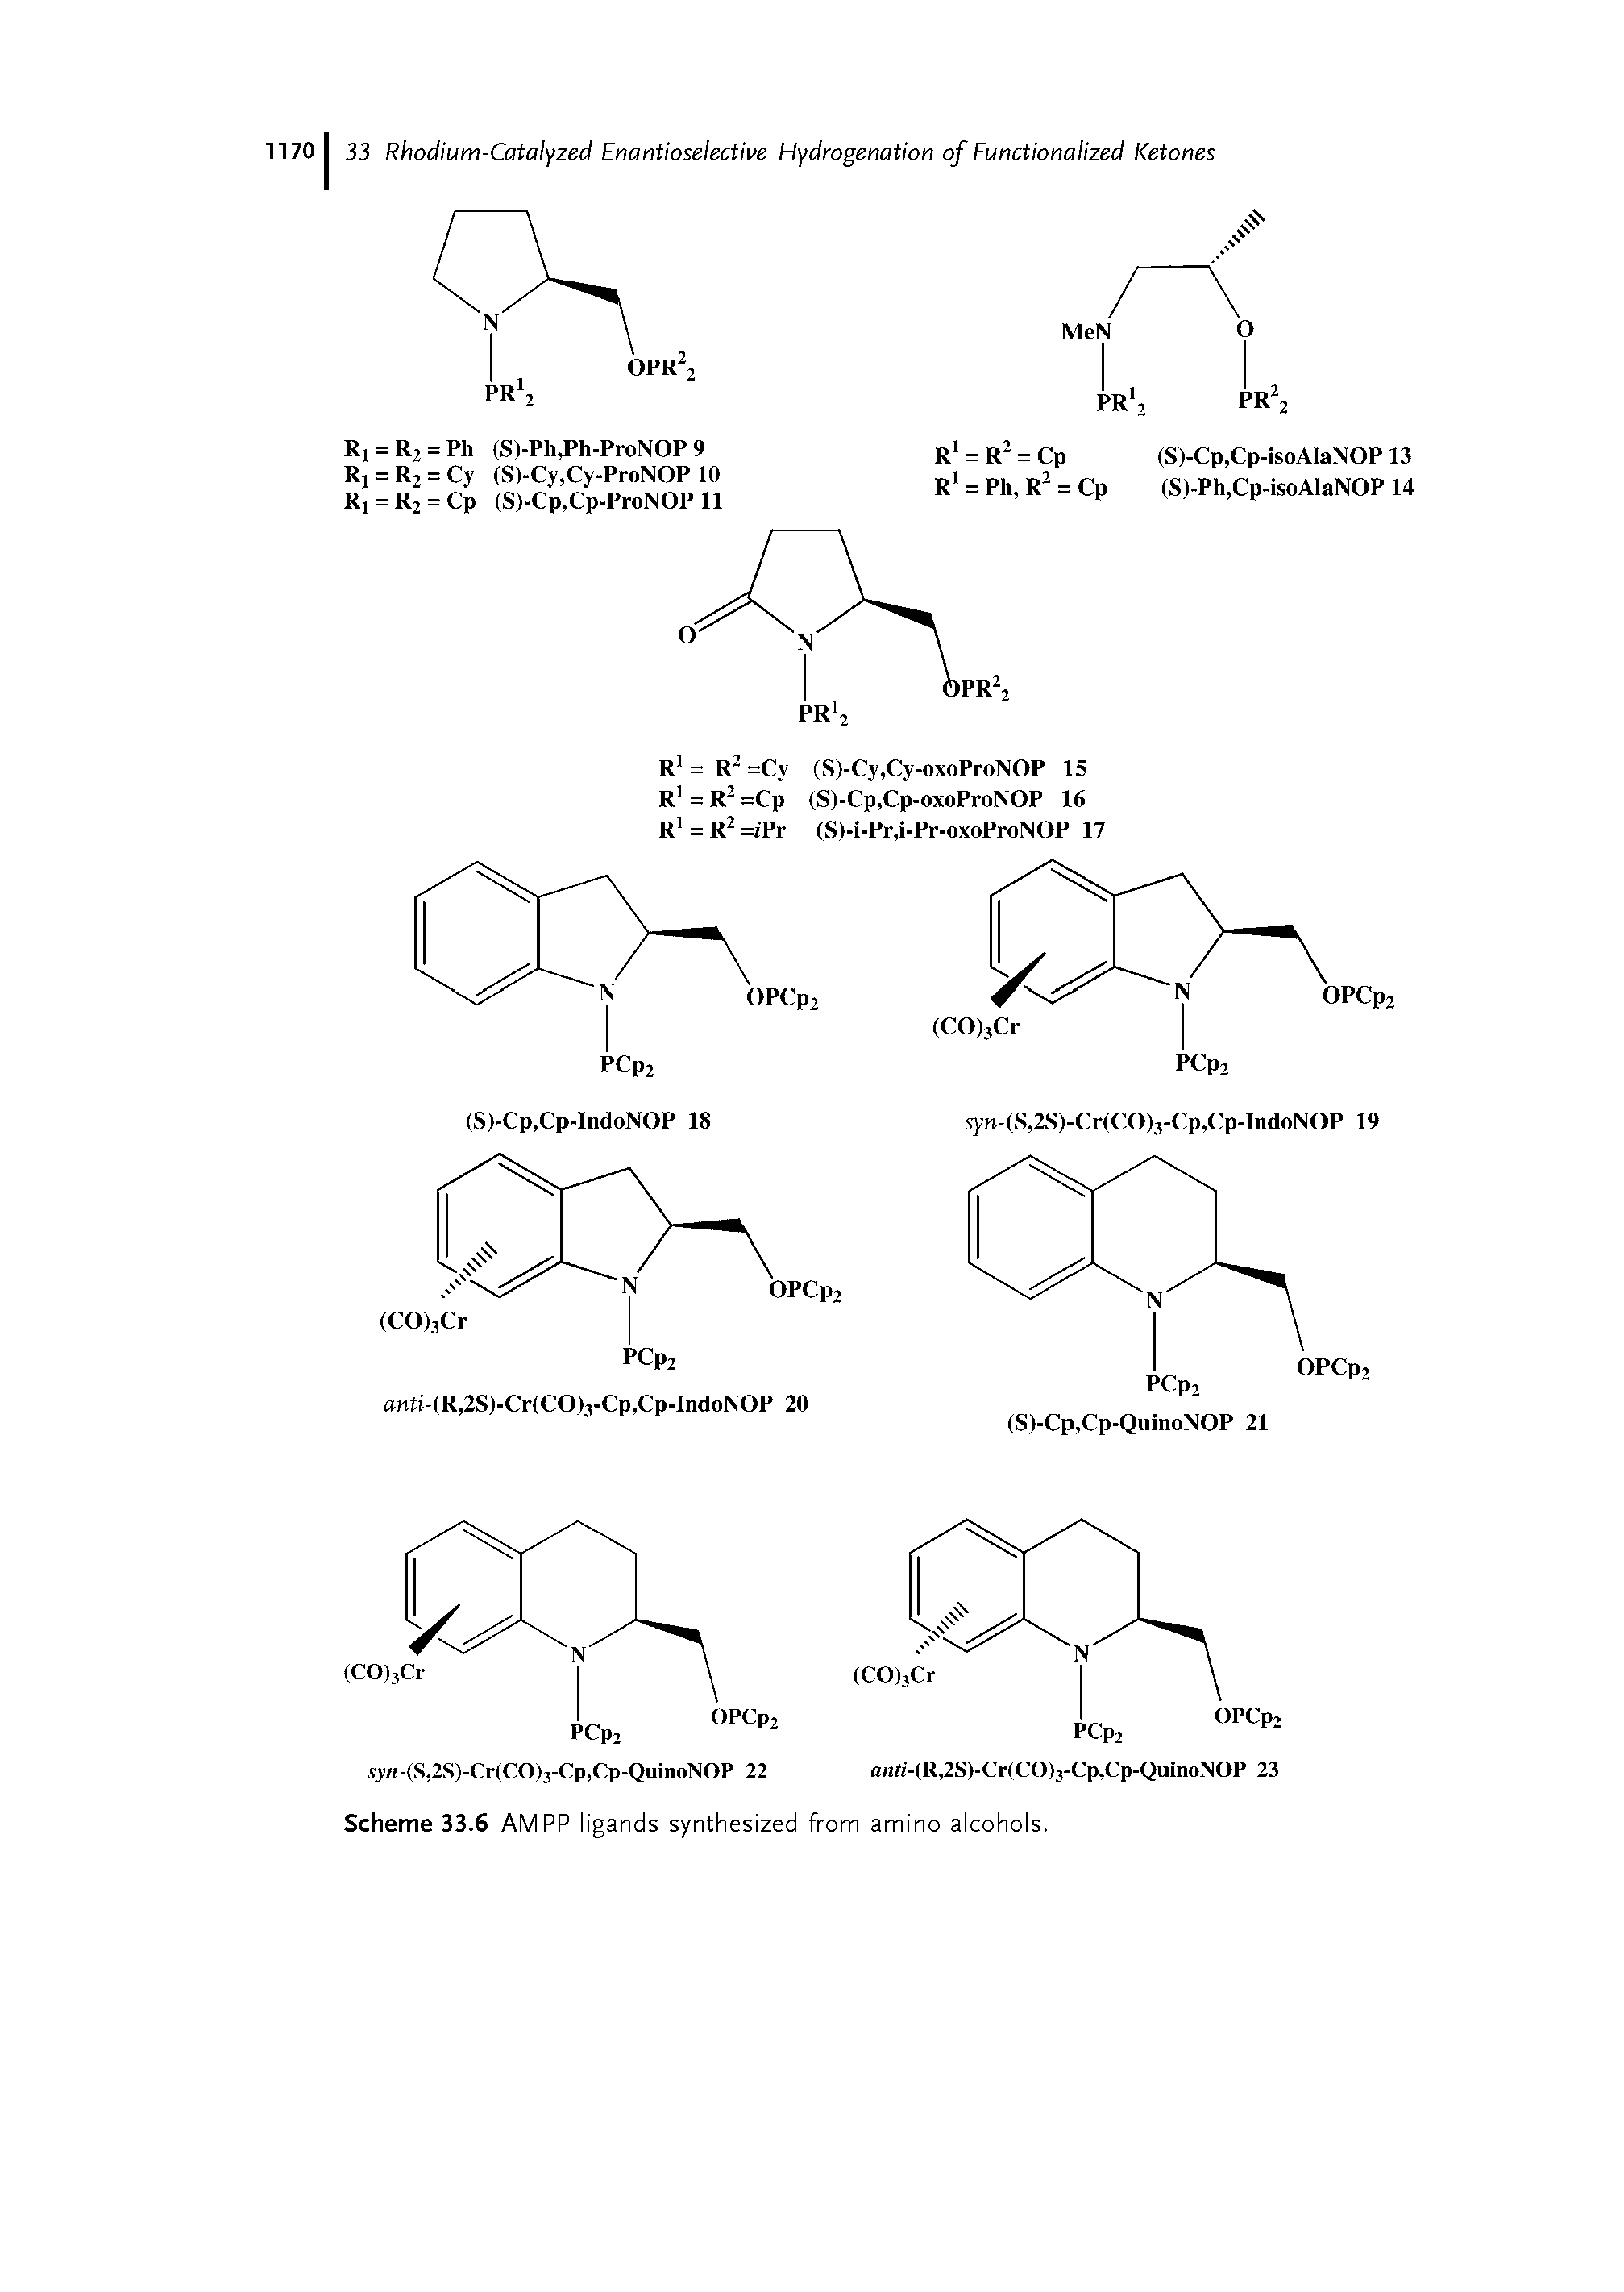 Scheme 33.6 AMPP ligands synthesized from amino alcohols.